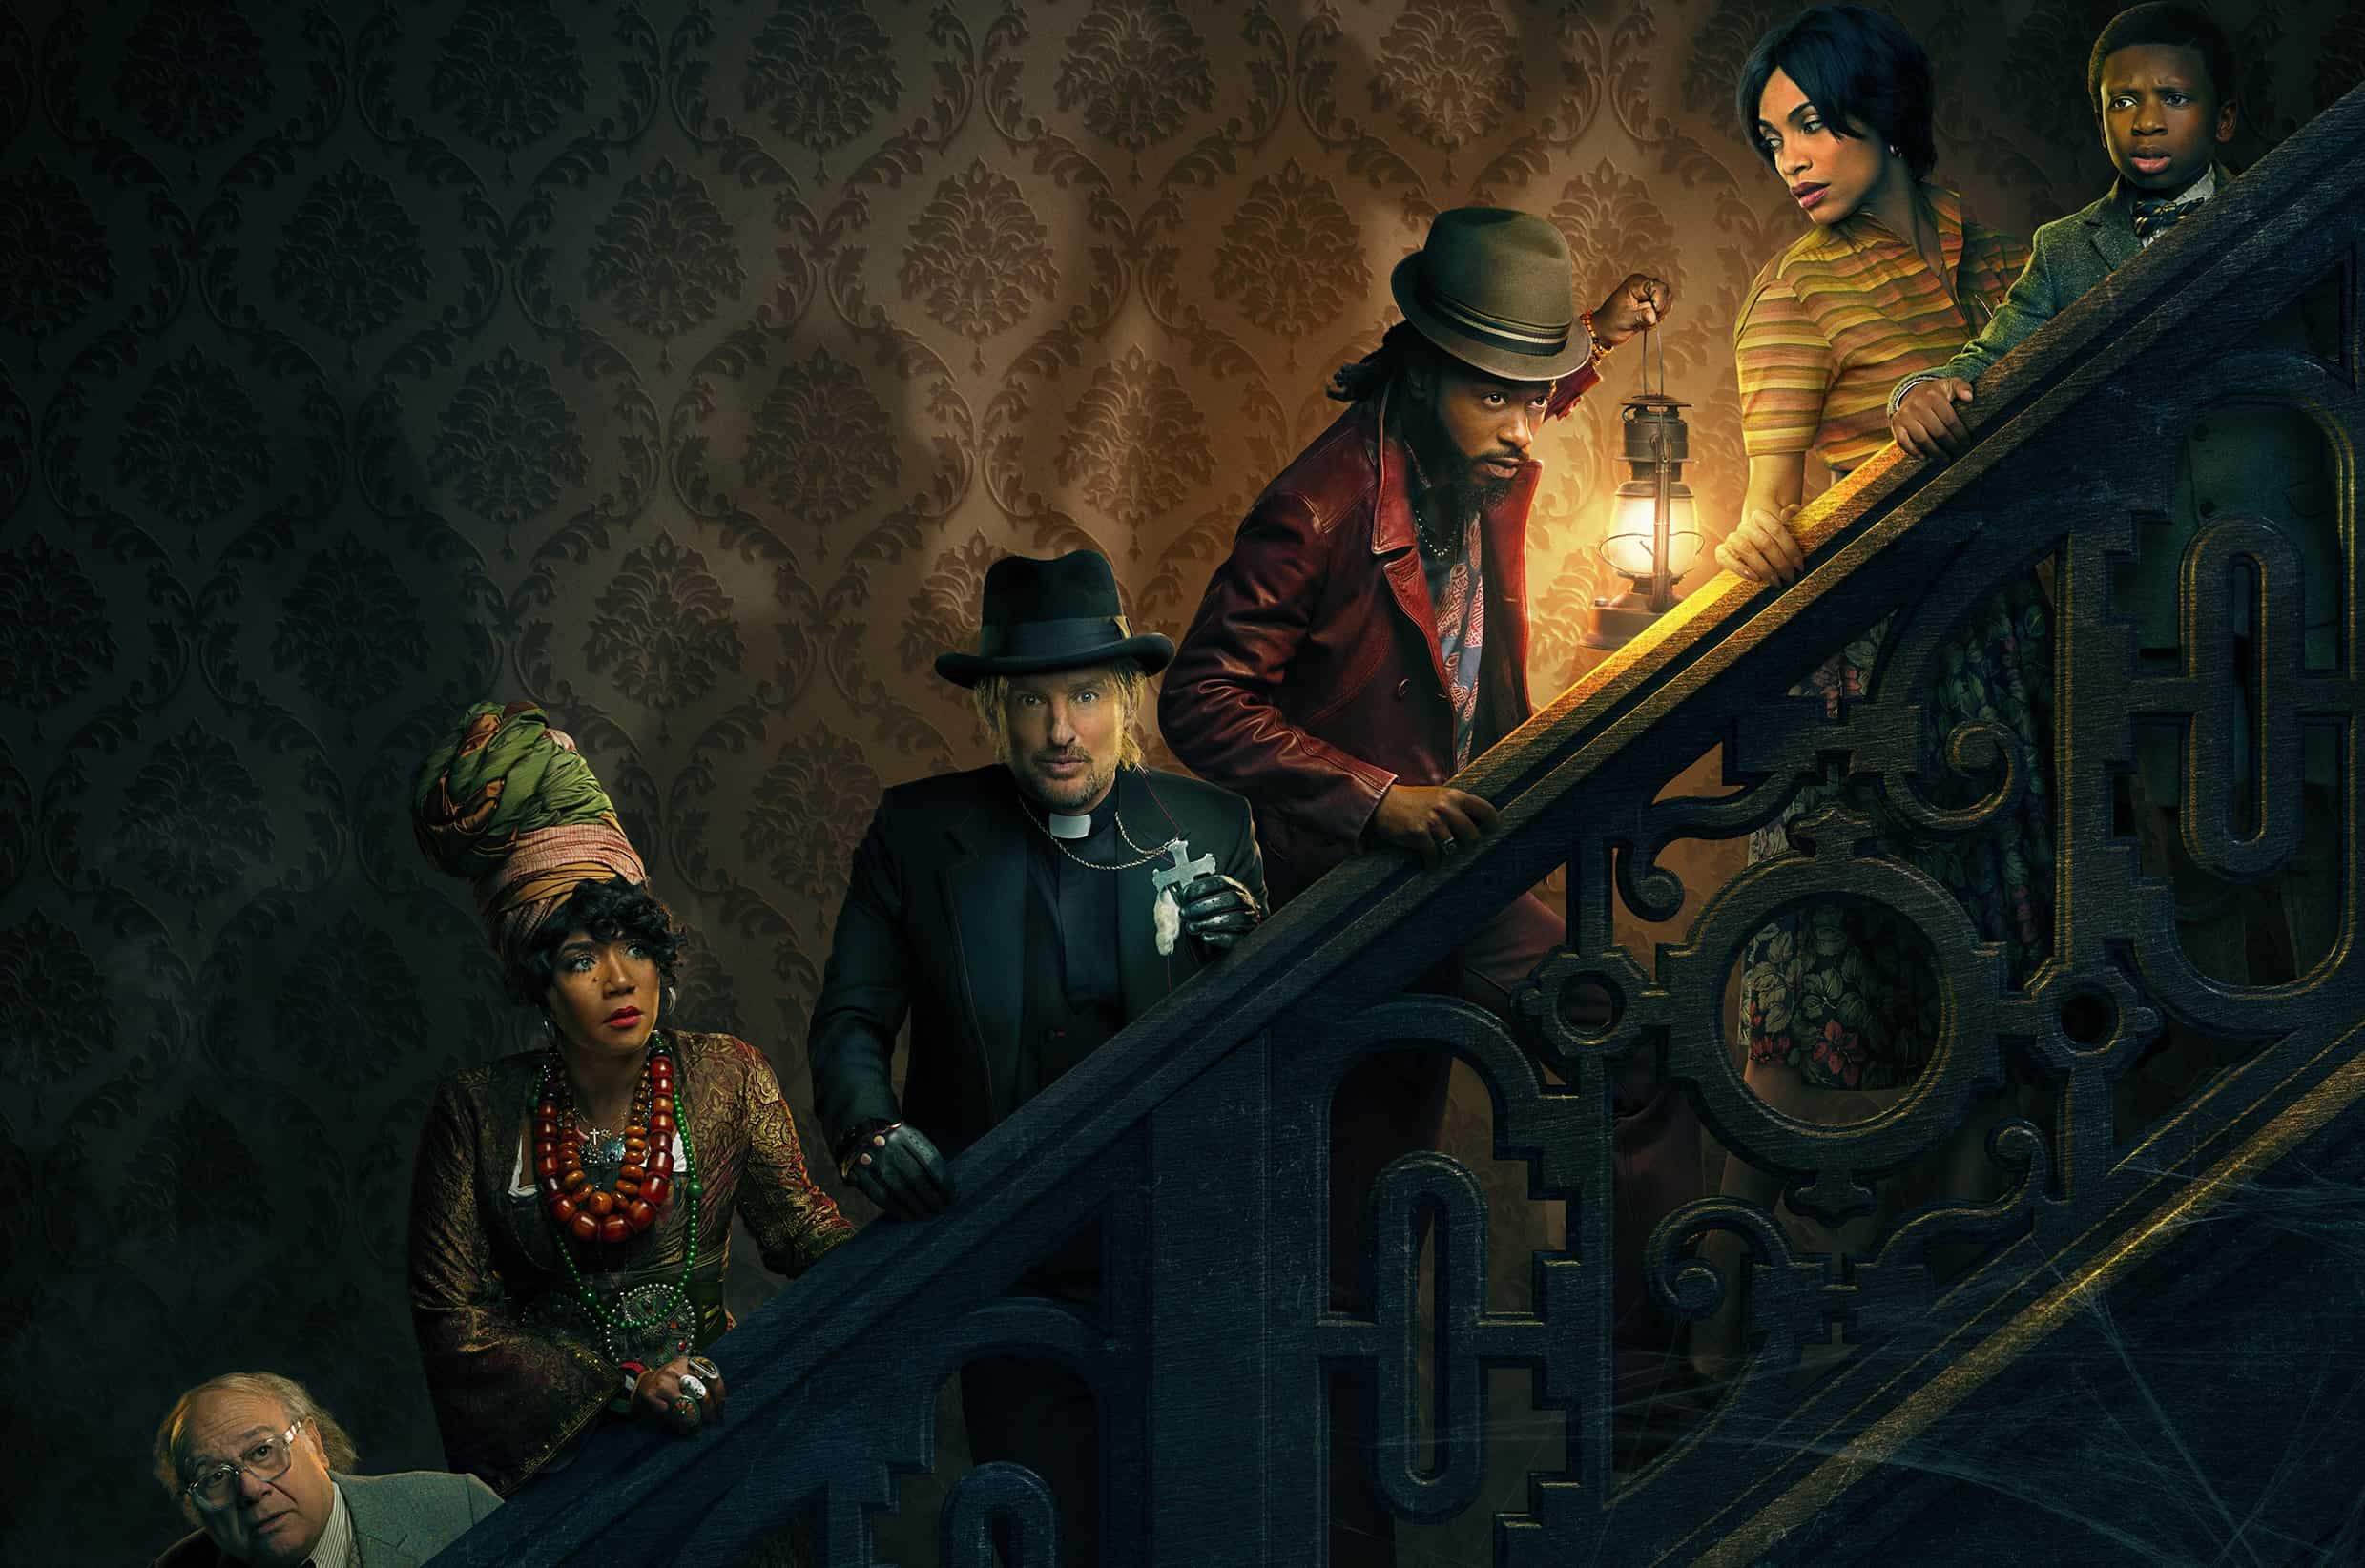 Promo image of the cast on the stairs in this image from Disney